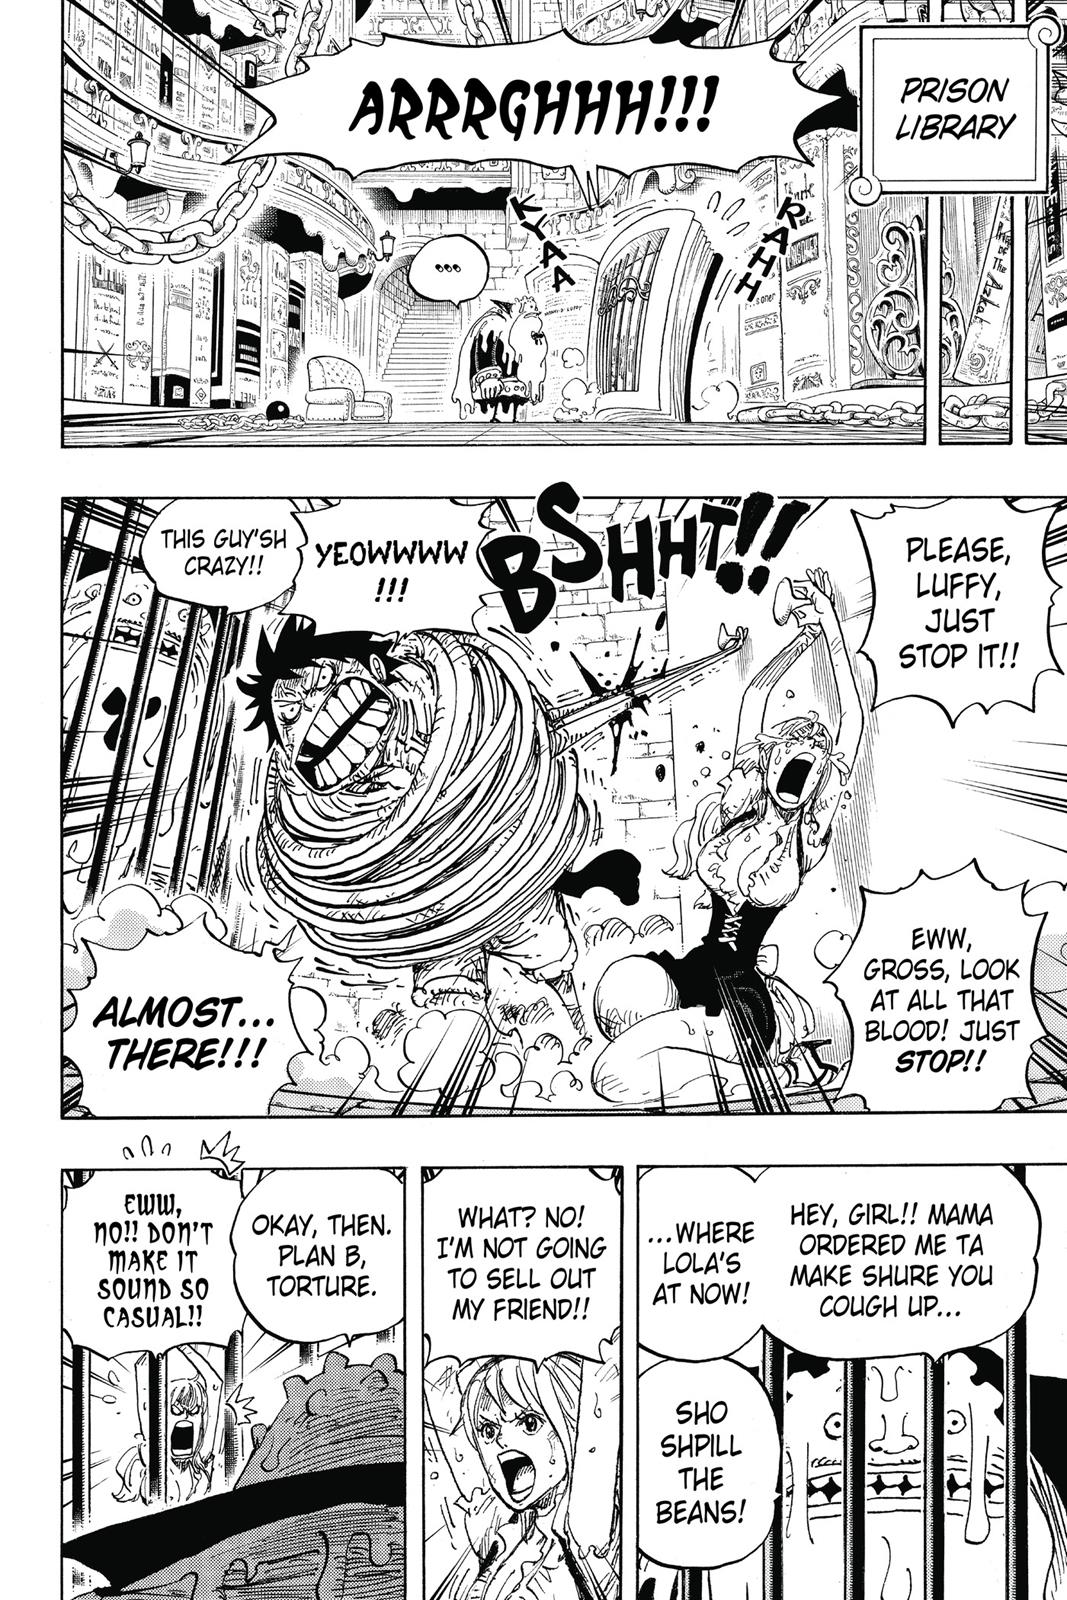 One Piece Chapter 851 One Piece Manga Online